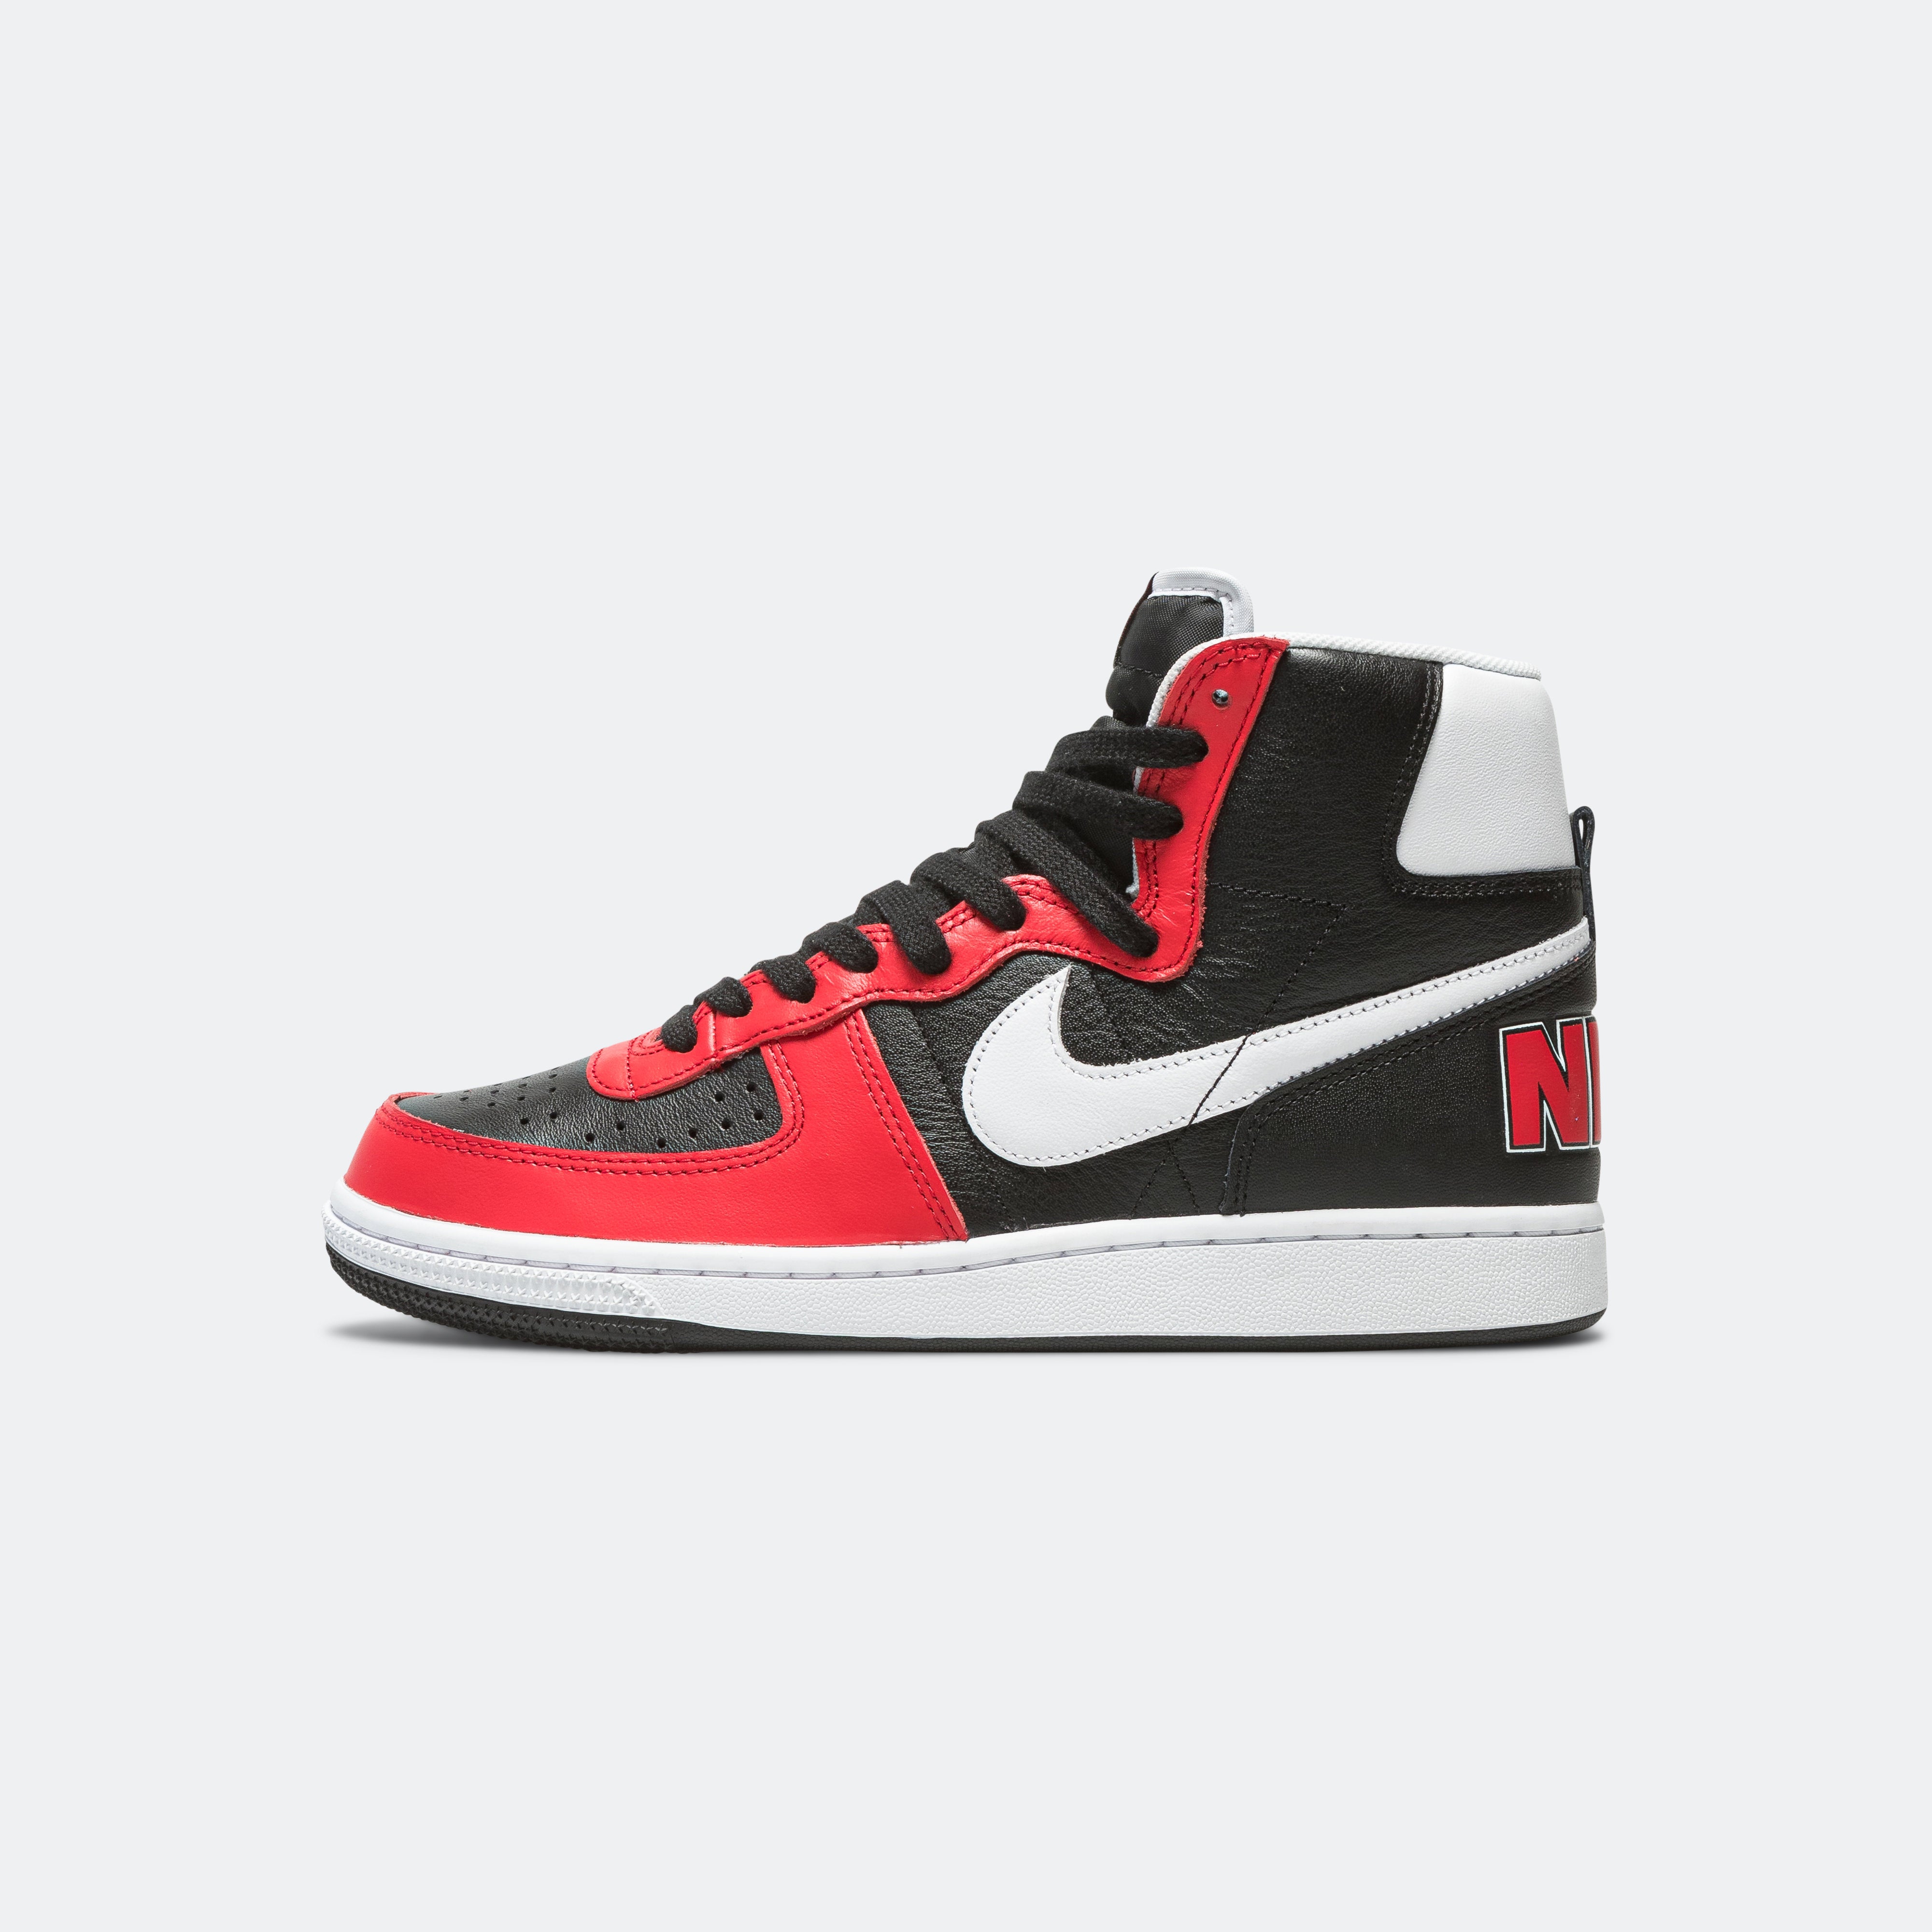 Nike Terminator High - Black/White-University Red | UP THERE